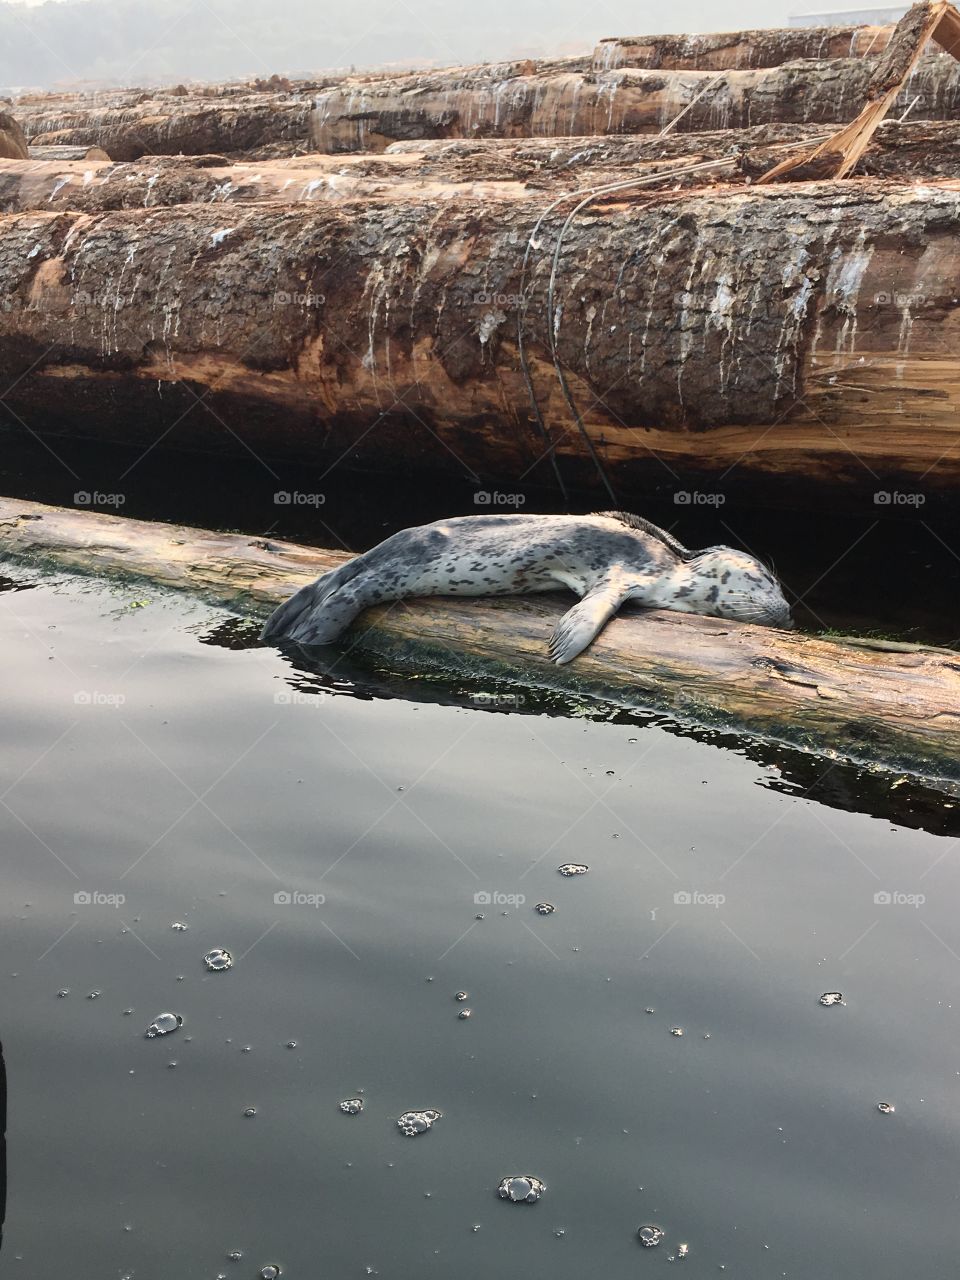 This a sleeping baby seal. We found it out kayaking. They don’t get scared of people till they get older!! Don’t worry it is sleeping it swam away soon after the pic.